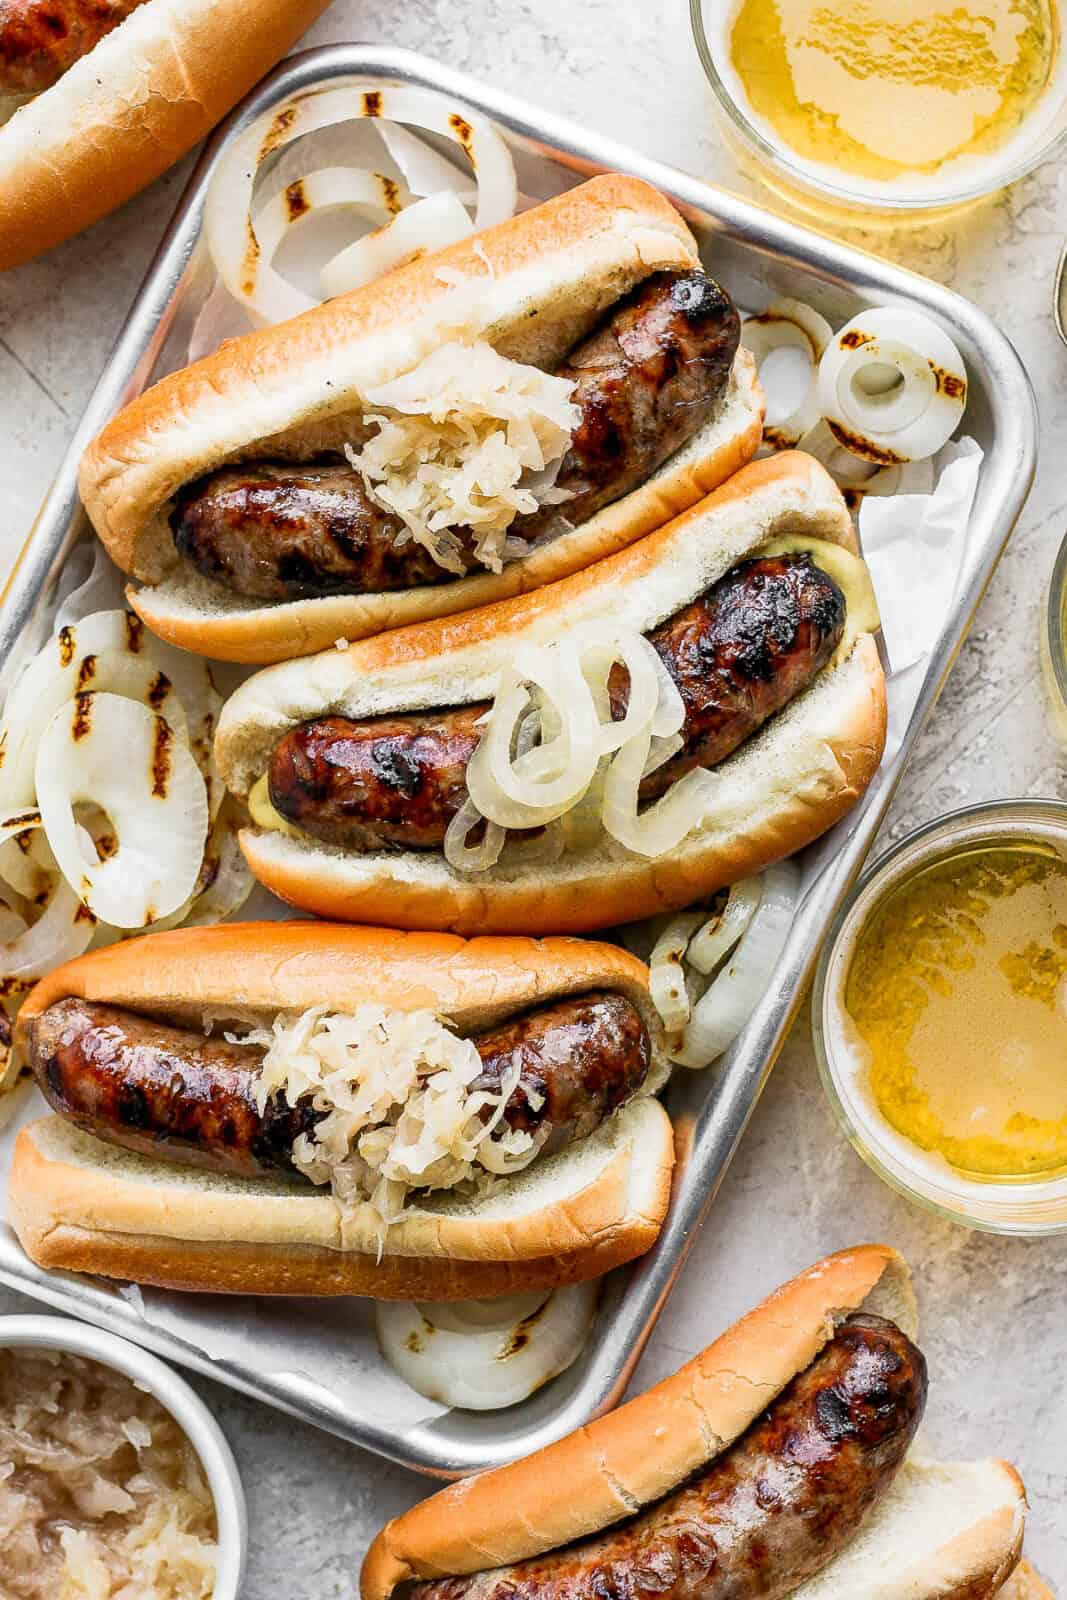 A tray of beer brats with grilled onions and sauerkraut on top.